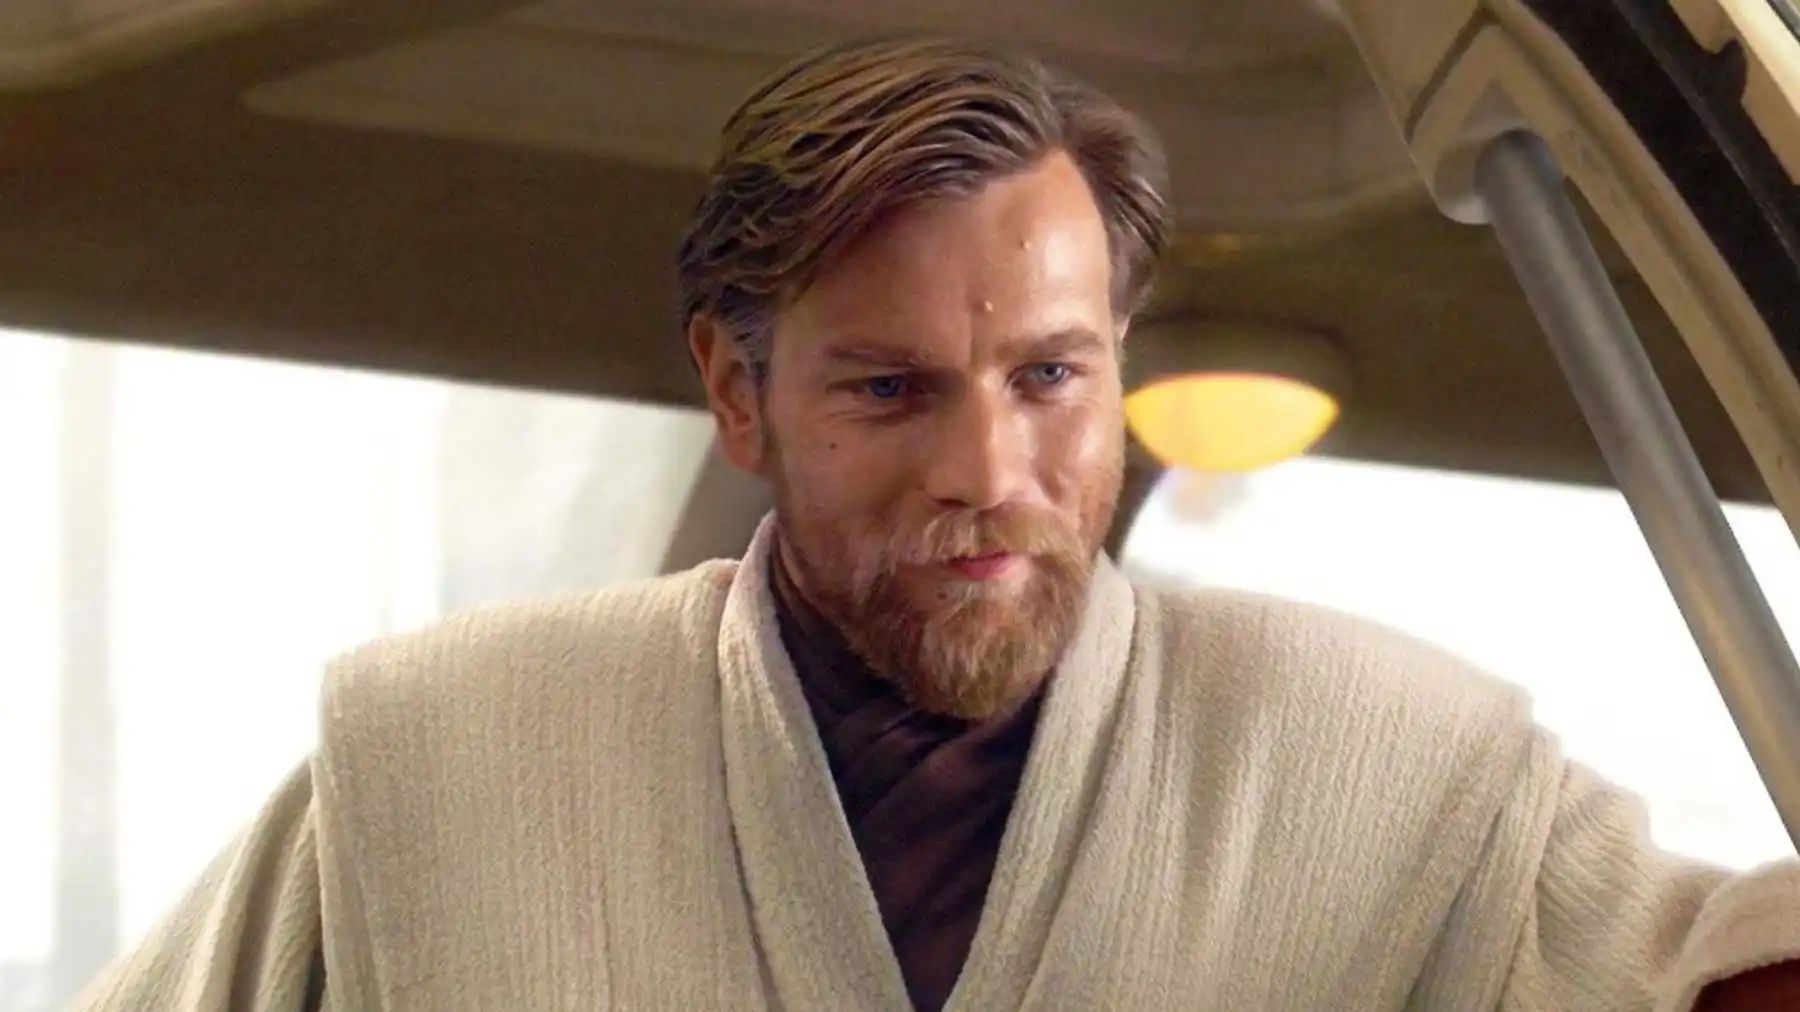 How Much Do You Know About Obi-Wan Kenobi?